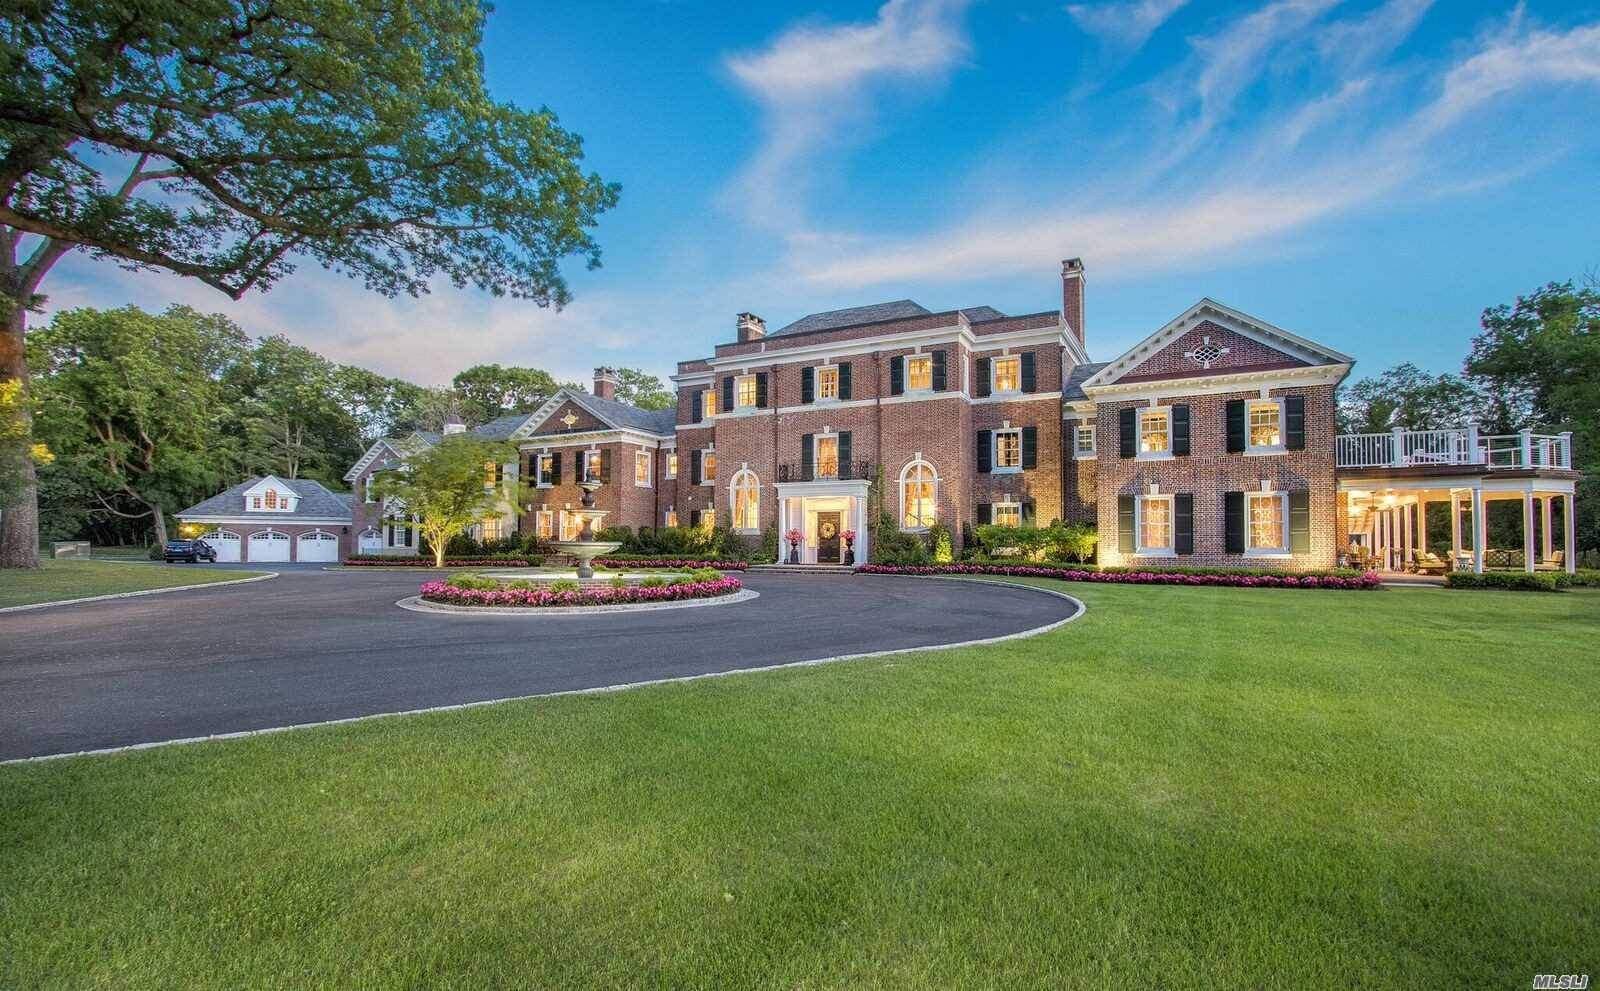 Magnificent Restored amp ; Renovated Four Story Georgian Colonial Is Rich In History And Amenities.